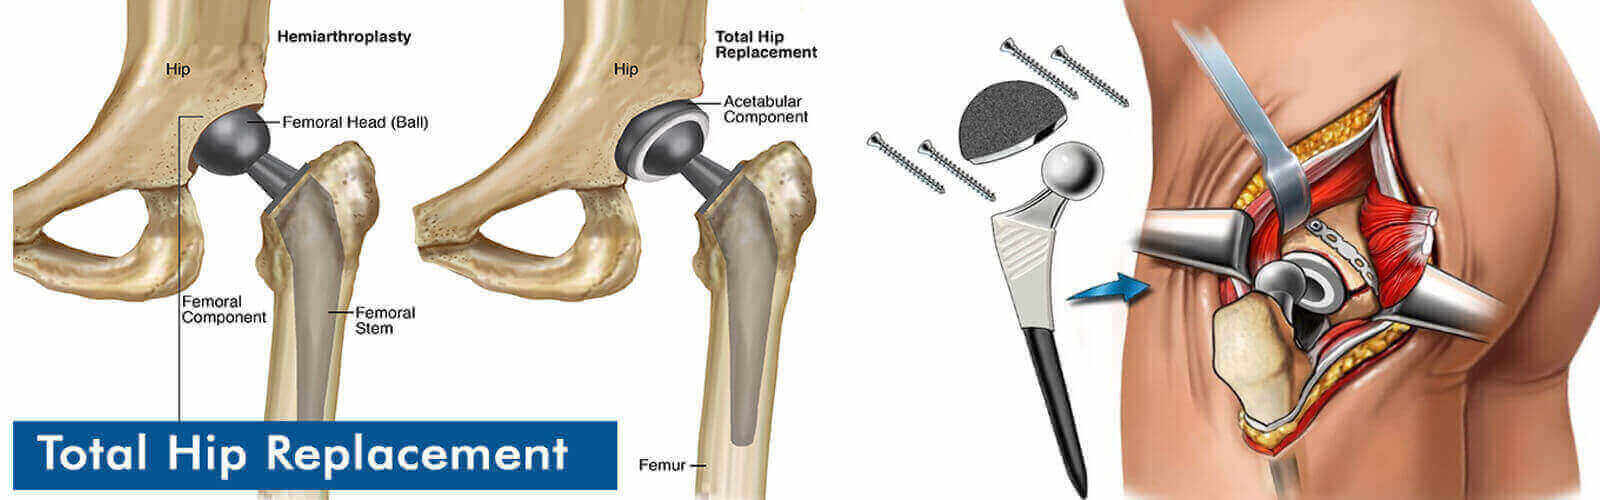 Hip Replacement Surgery Or Hip Resurfacing in Oman